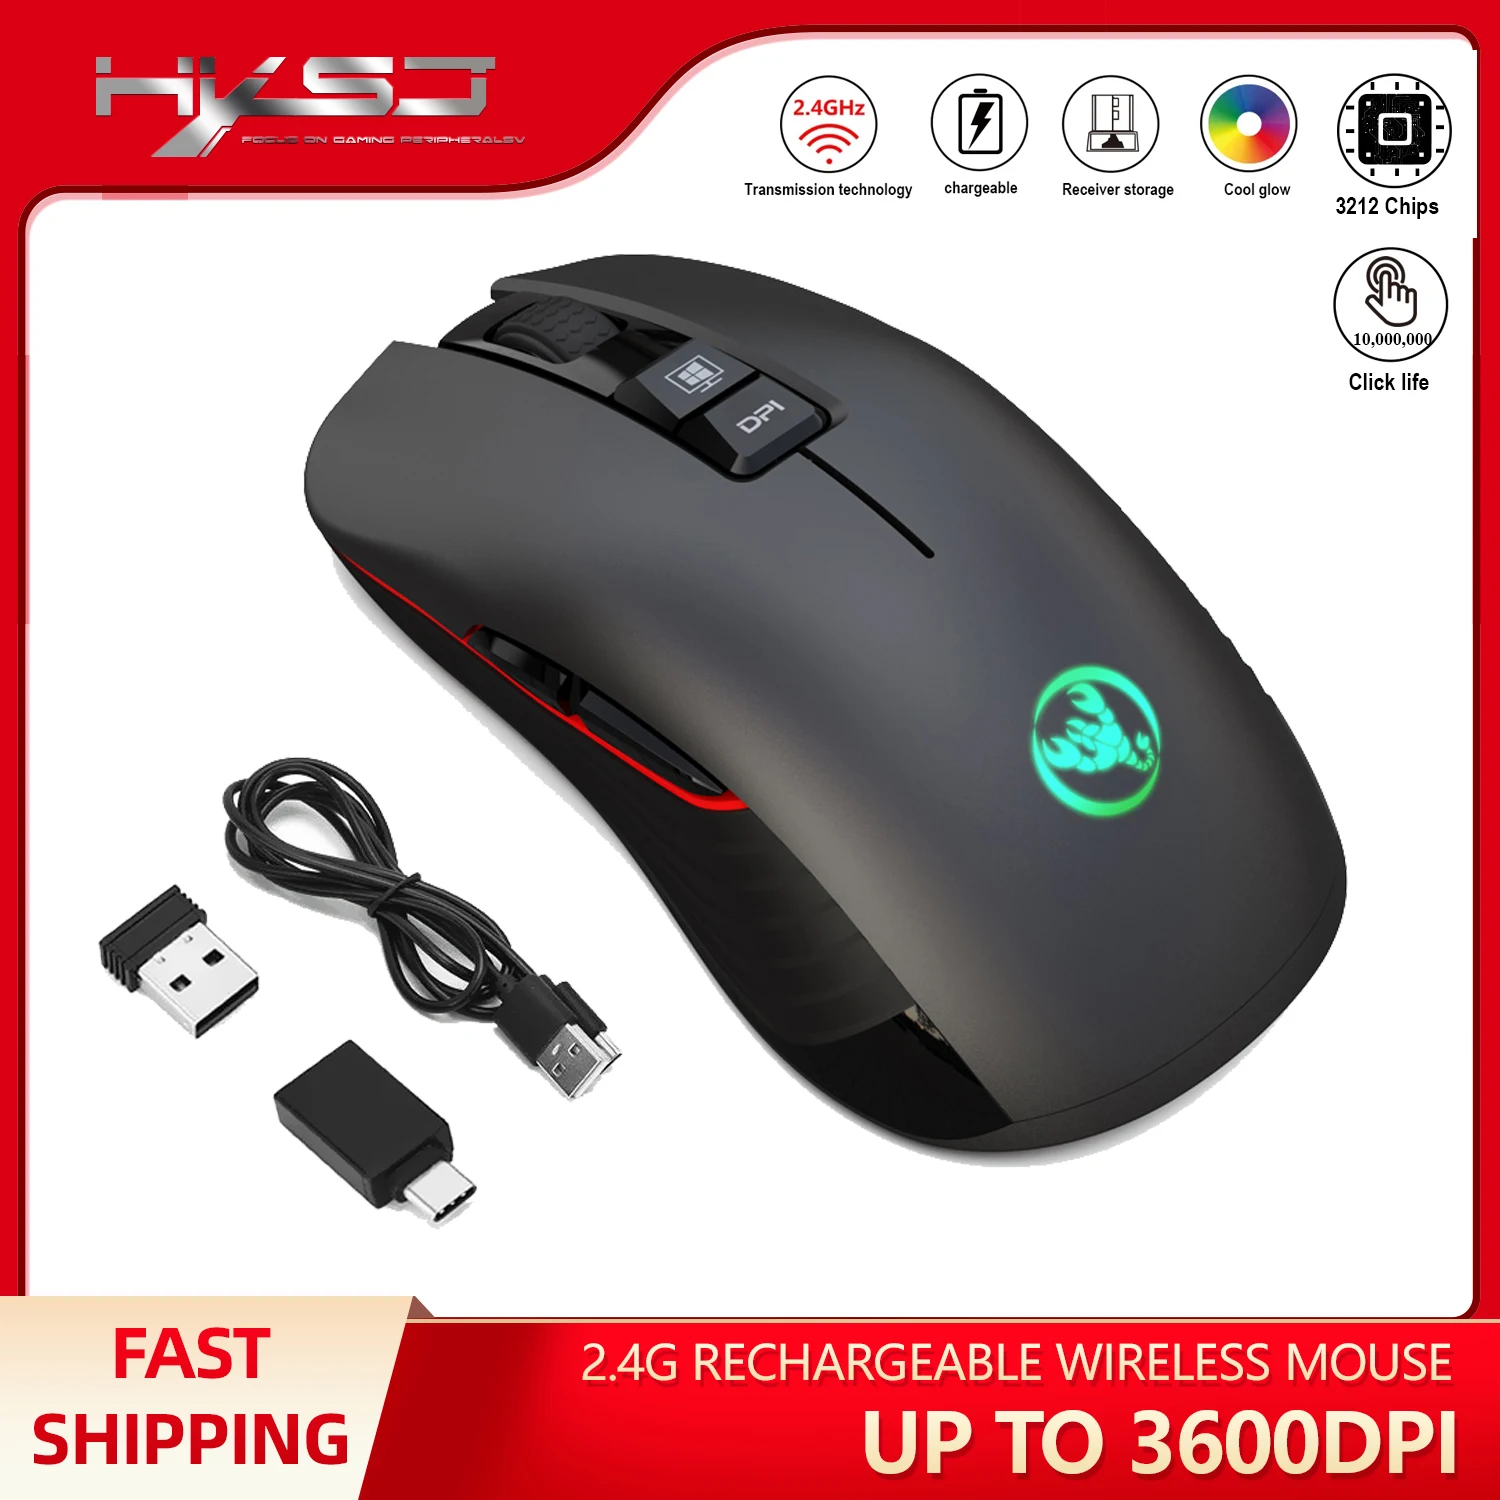 

HXSJ Rechargeable Gaming Mouse2.4G USB Wireless Mouse 3600DPI ABS 7 Buttons Type-c Mute Mice for Macbook Laptop PC Game Mause